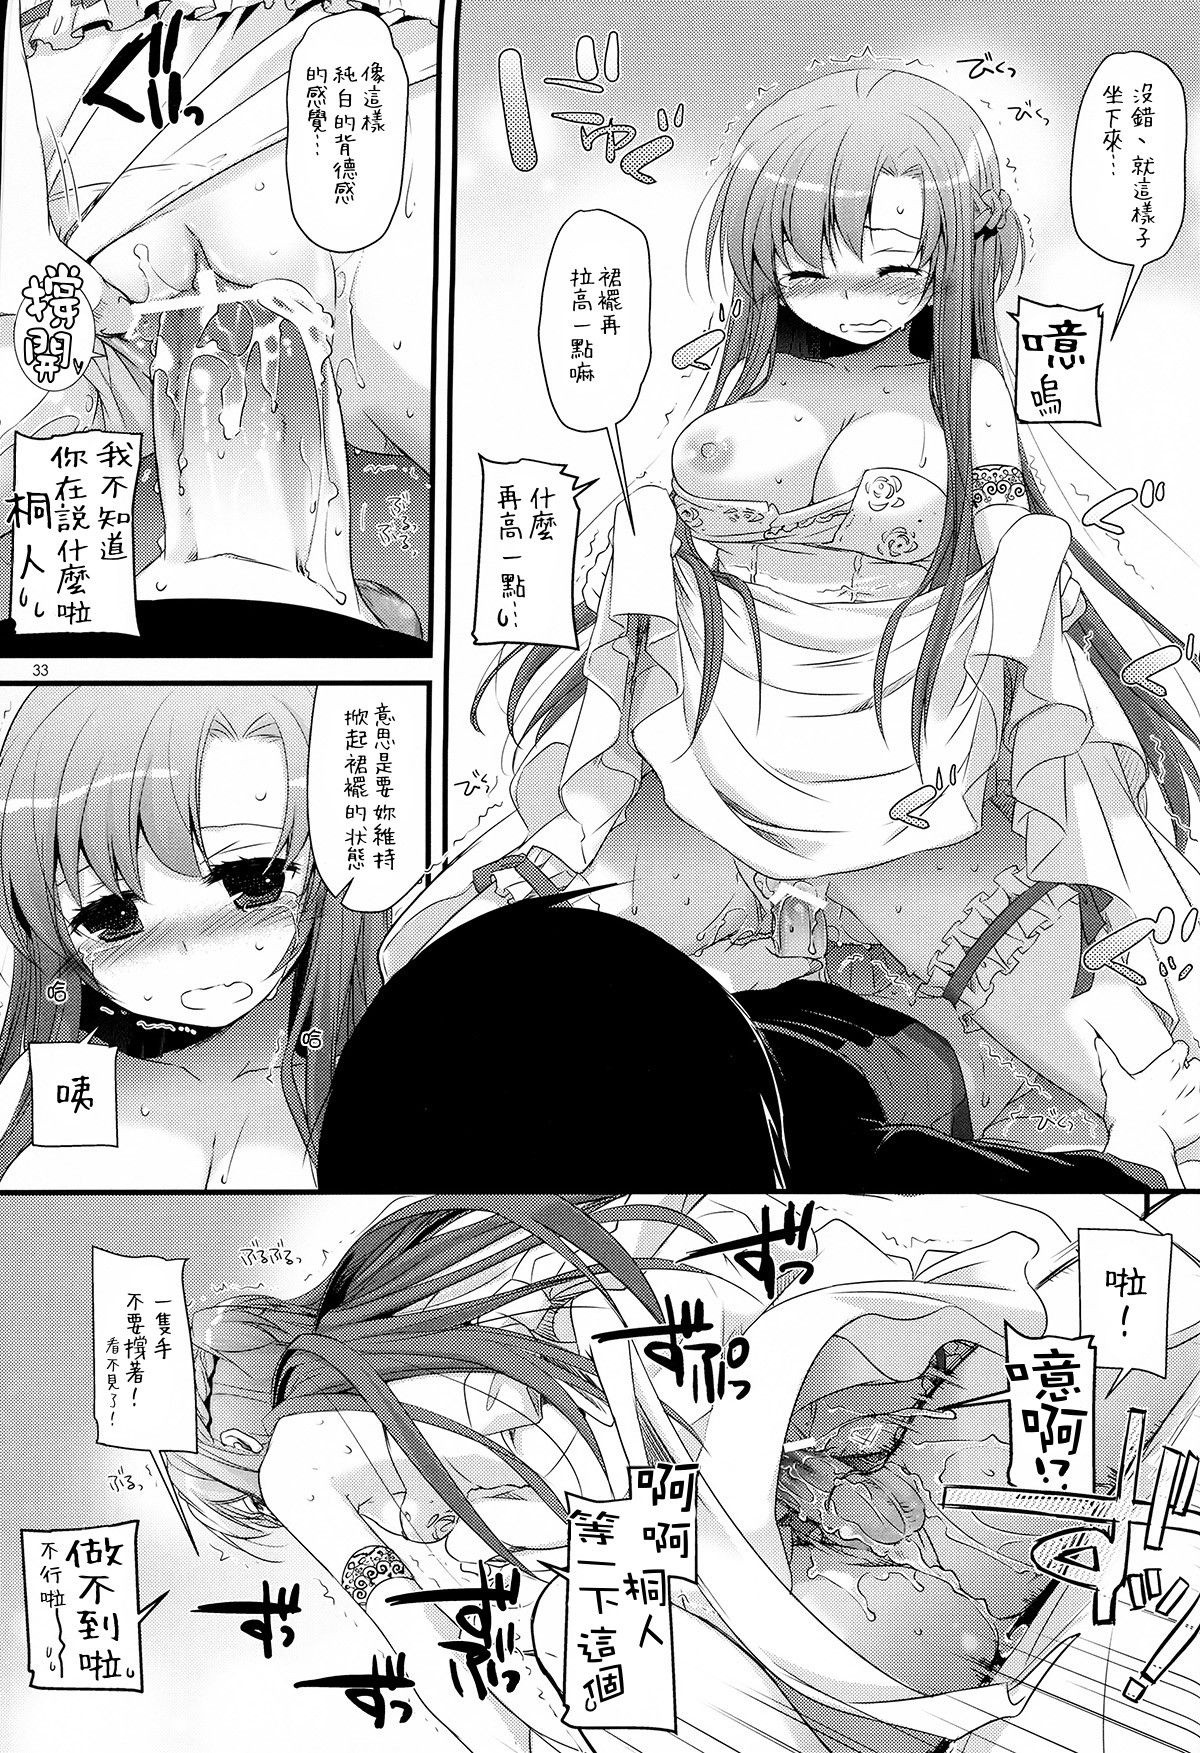 D.L. Action 71 hentai manga picture 32